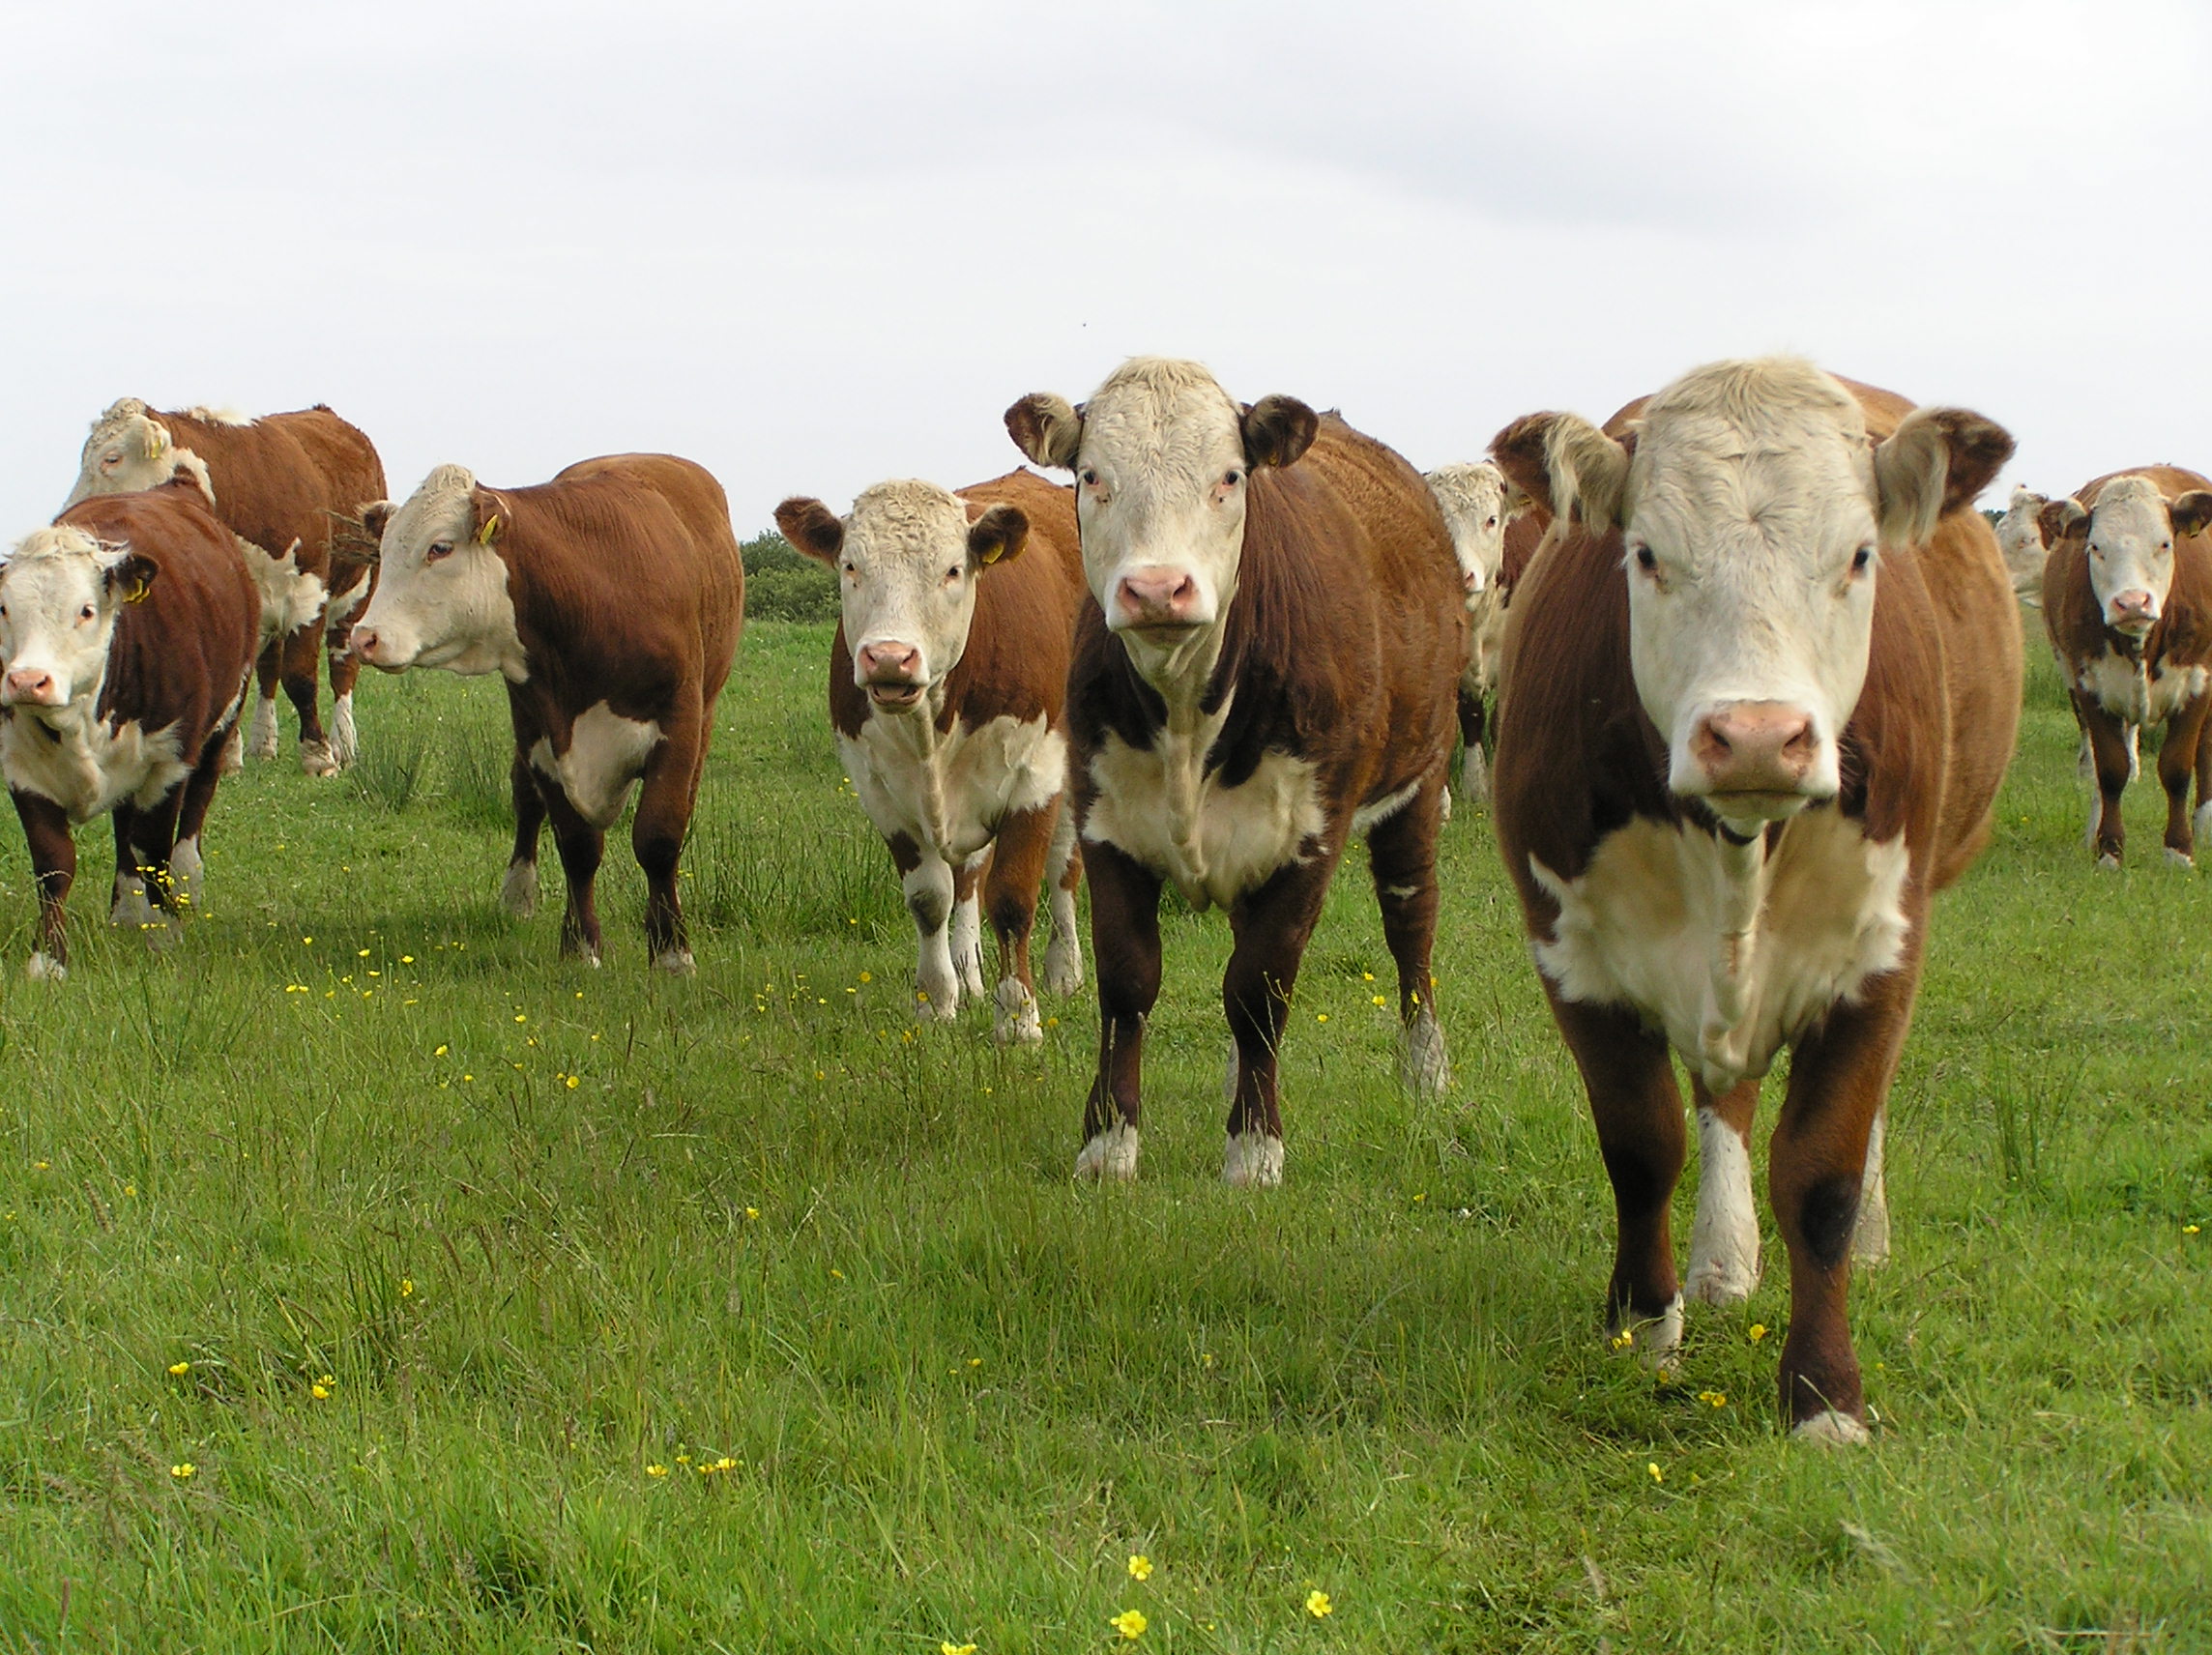 The Balance of Heifers vs. Steers in the Fed Cattle Harvest Mix Foretells a Turn in the Cattle Cycle